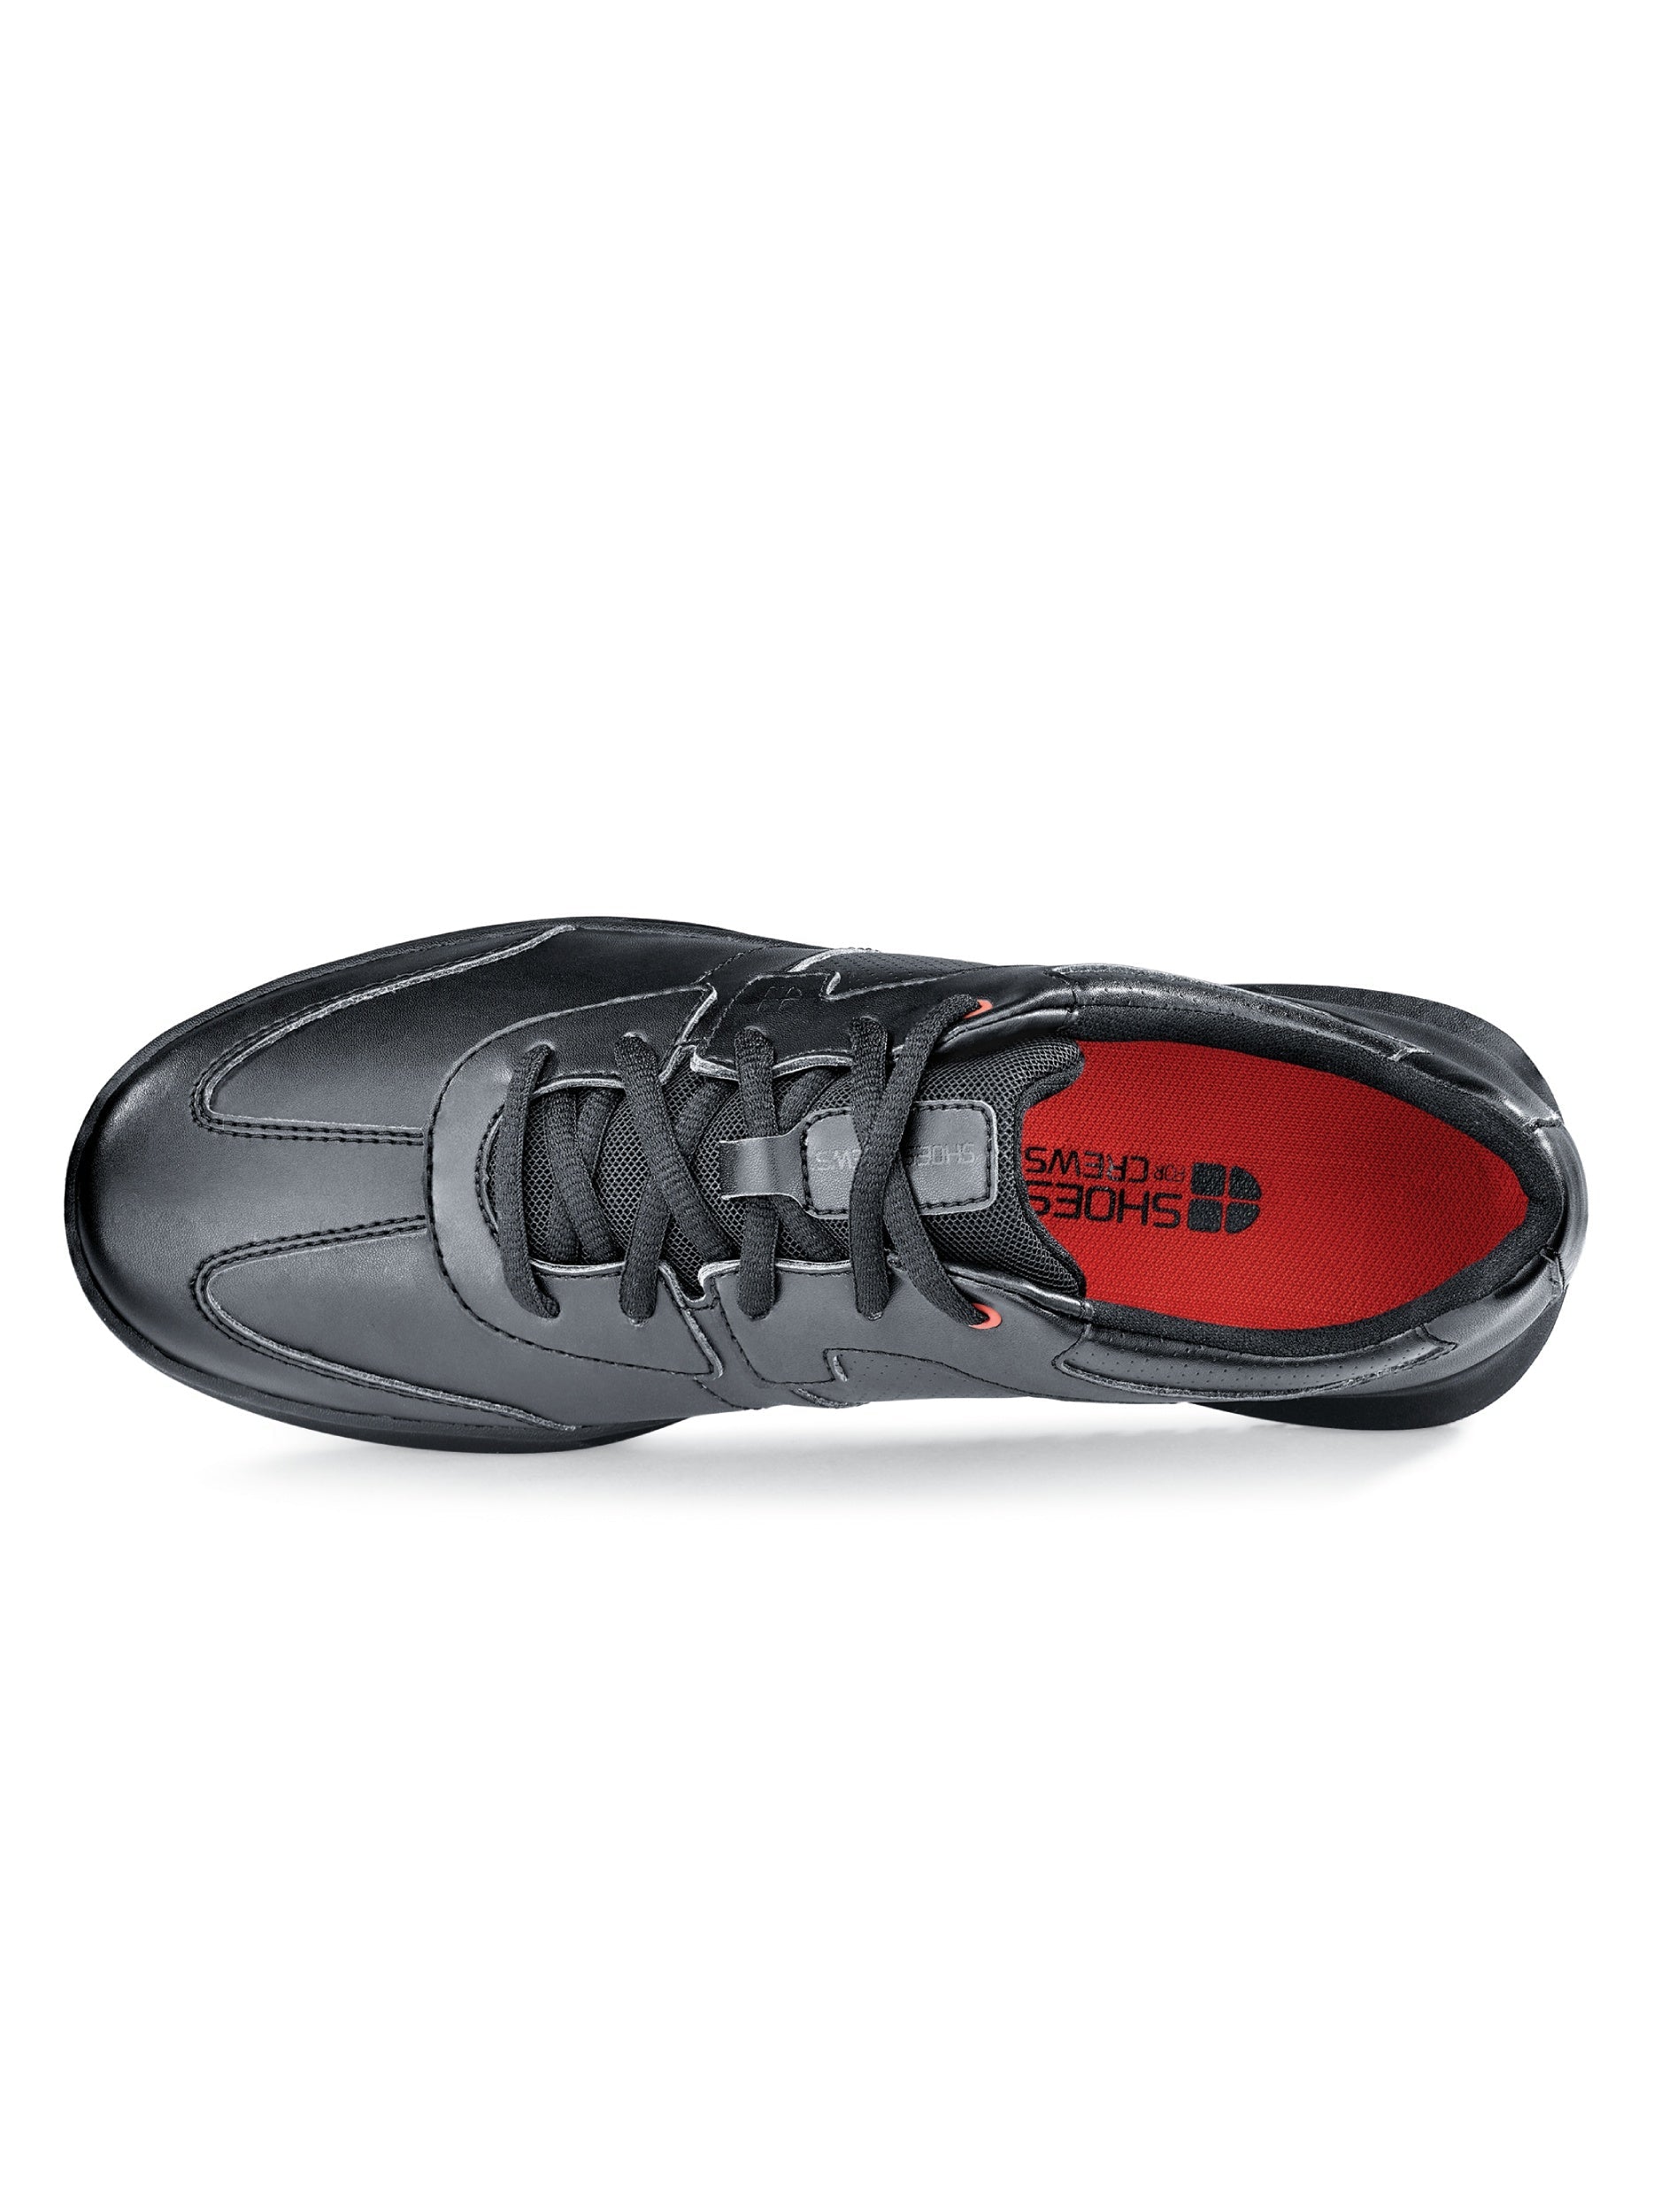 Men's Work Shoe Freestyle II Black by Shoes For Crews -  ChefsCotton